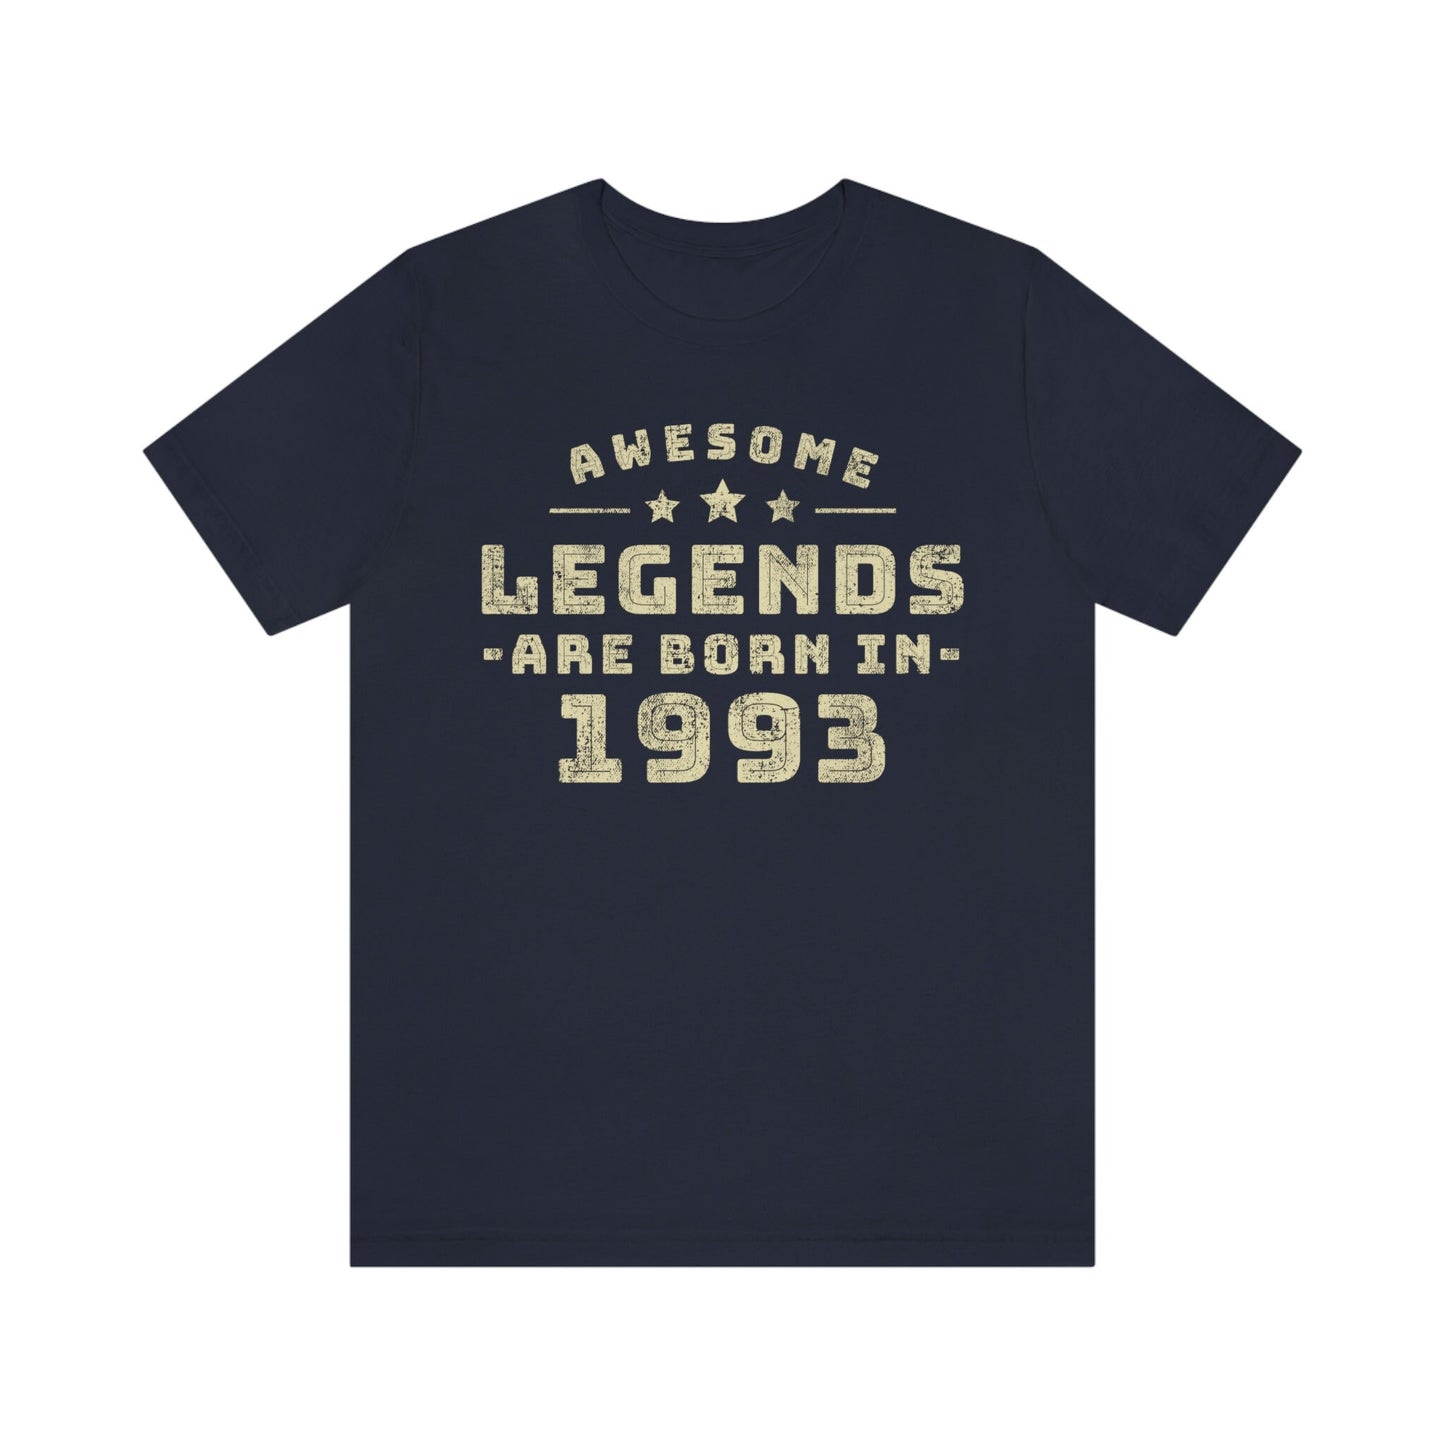 Birthday gift t-shirt for men or women, Awesome Legends are born in 1993 shirt for brother